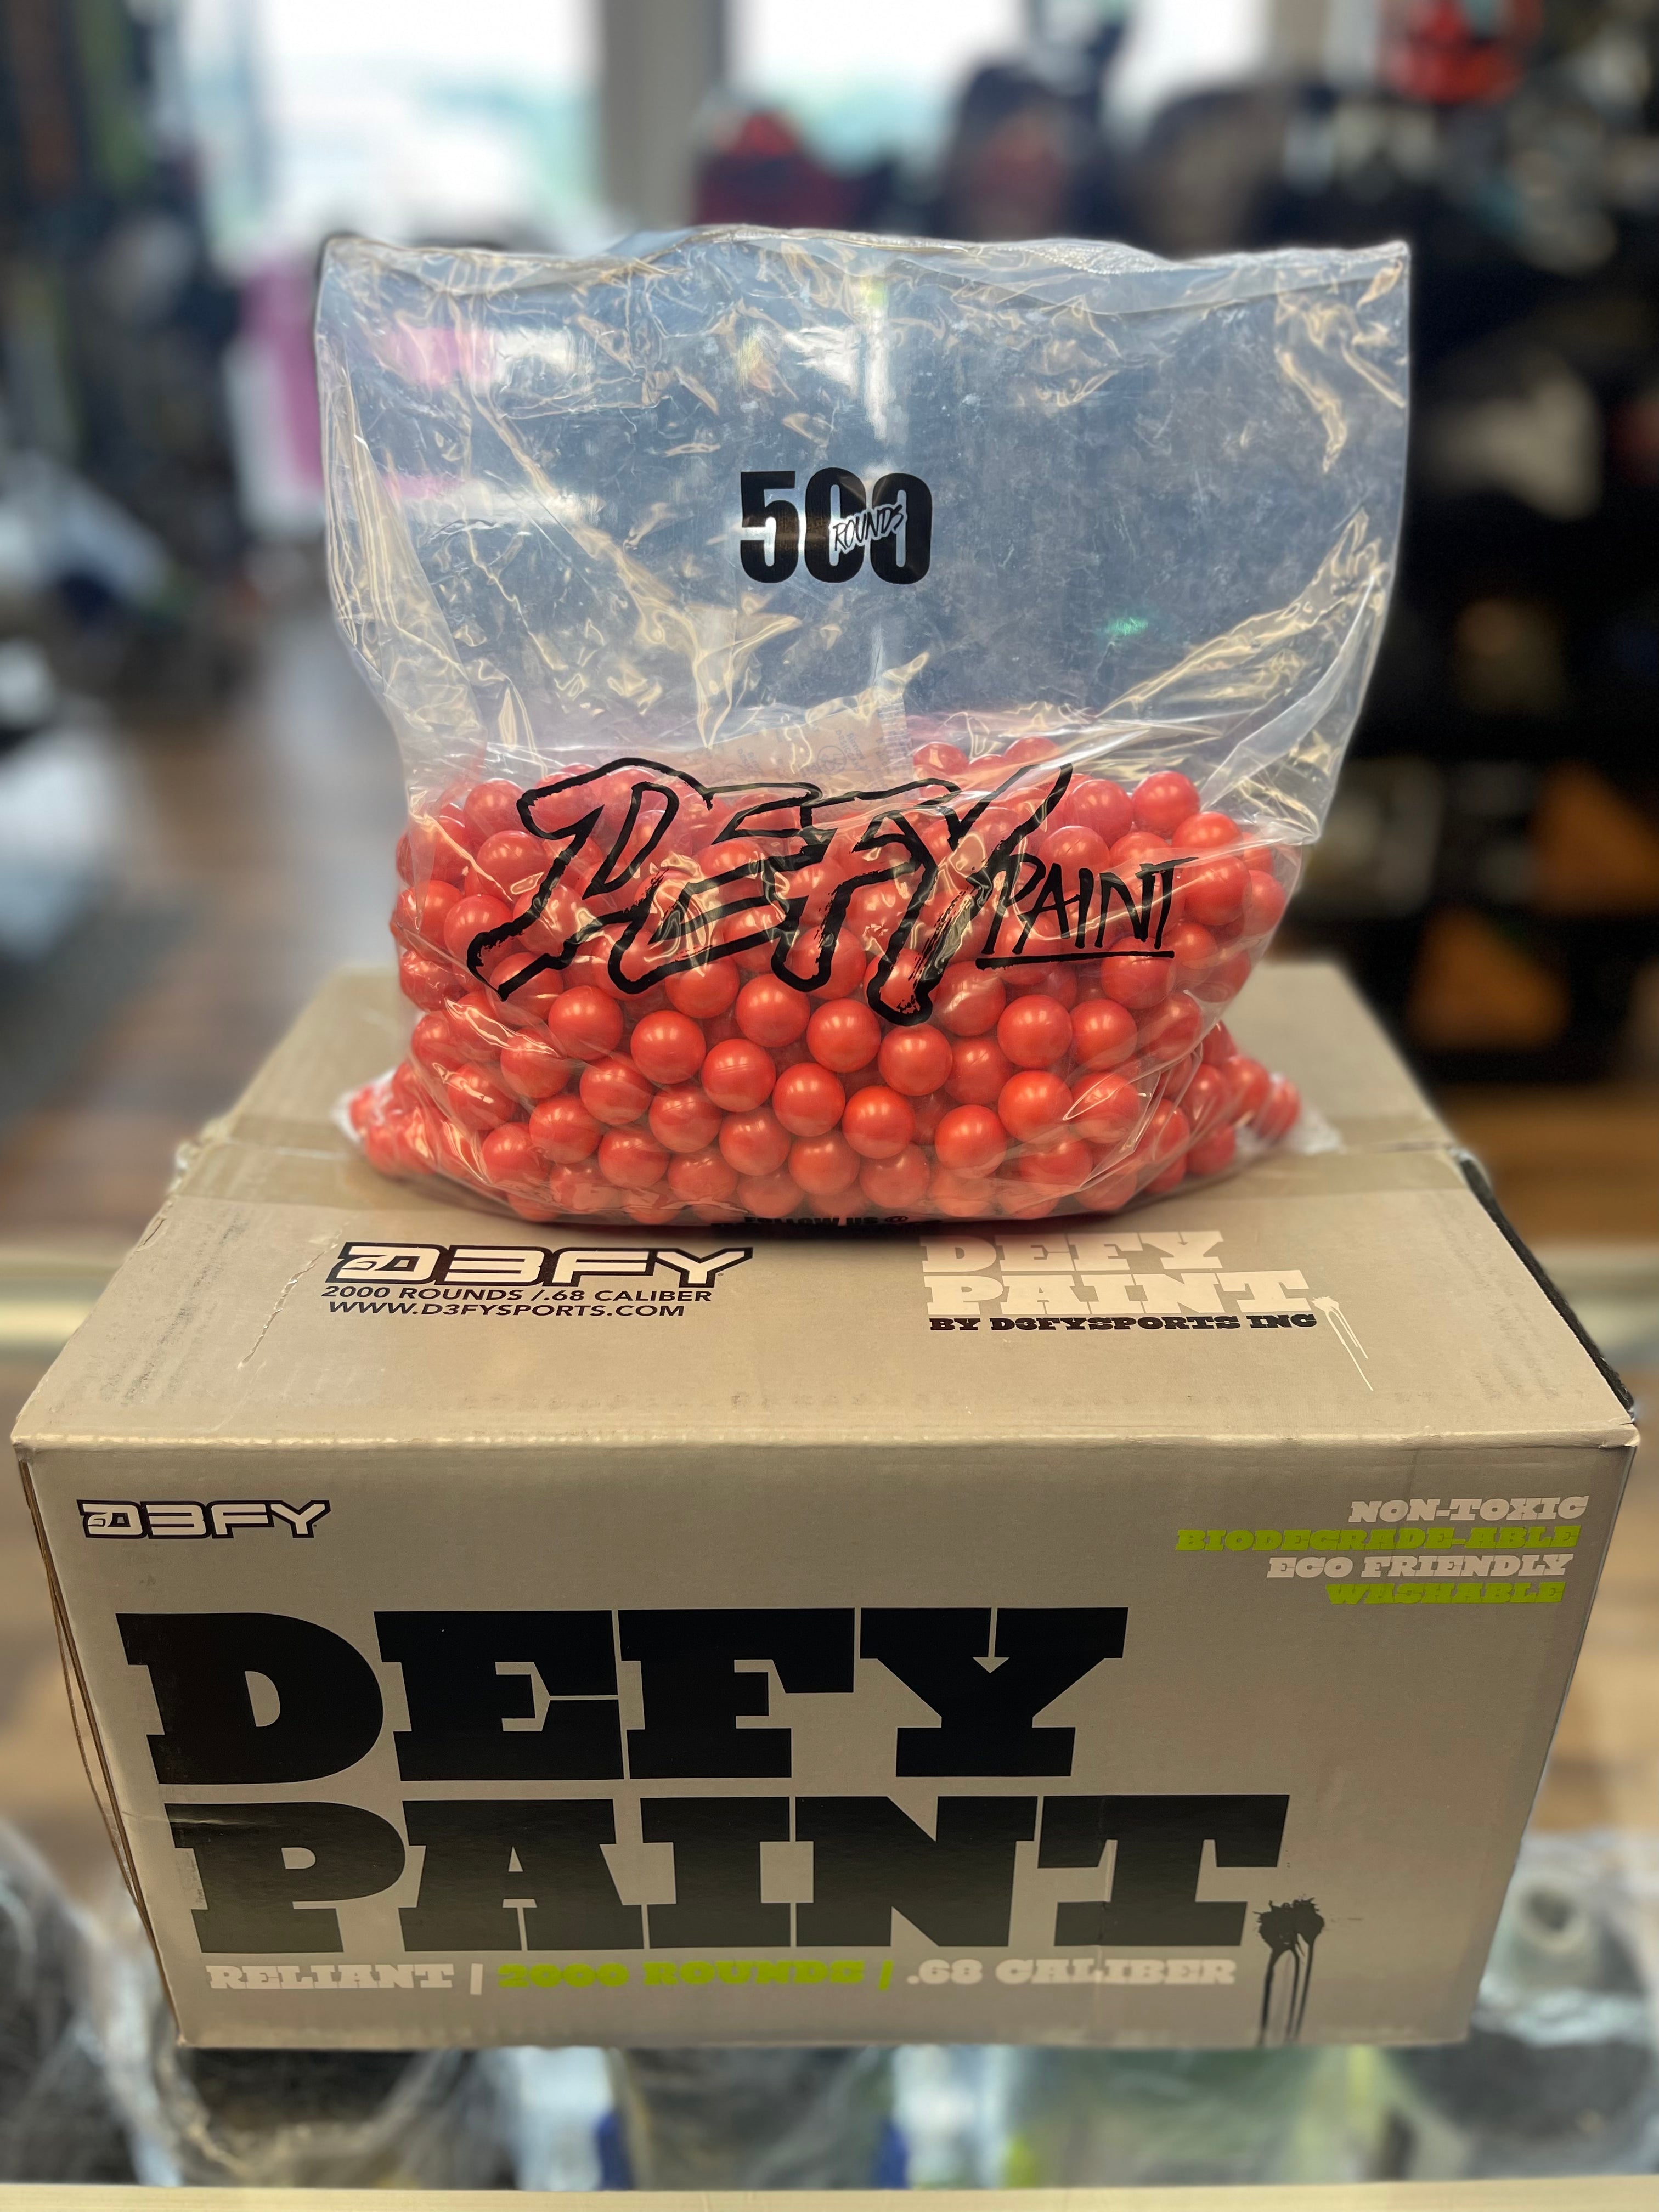 Defy Reliant Paintballs - 0.68 Caliber - 2000 Count - Non-Metallic Pink Shell / Yellow Fill